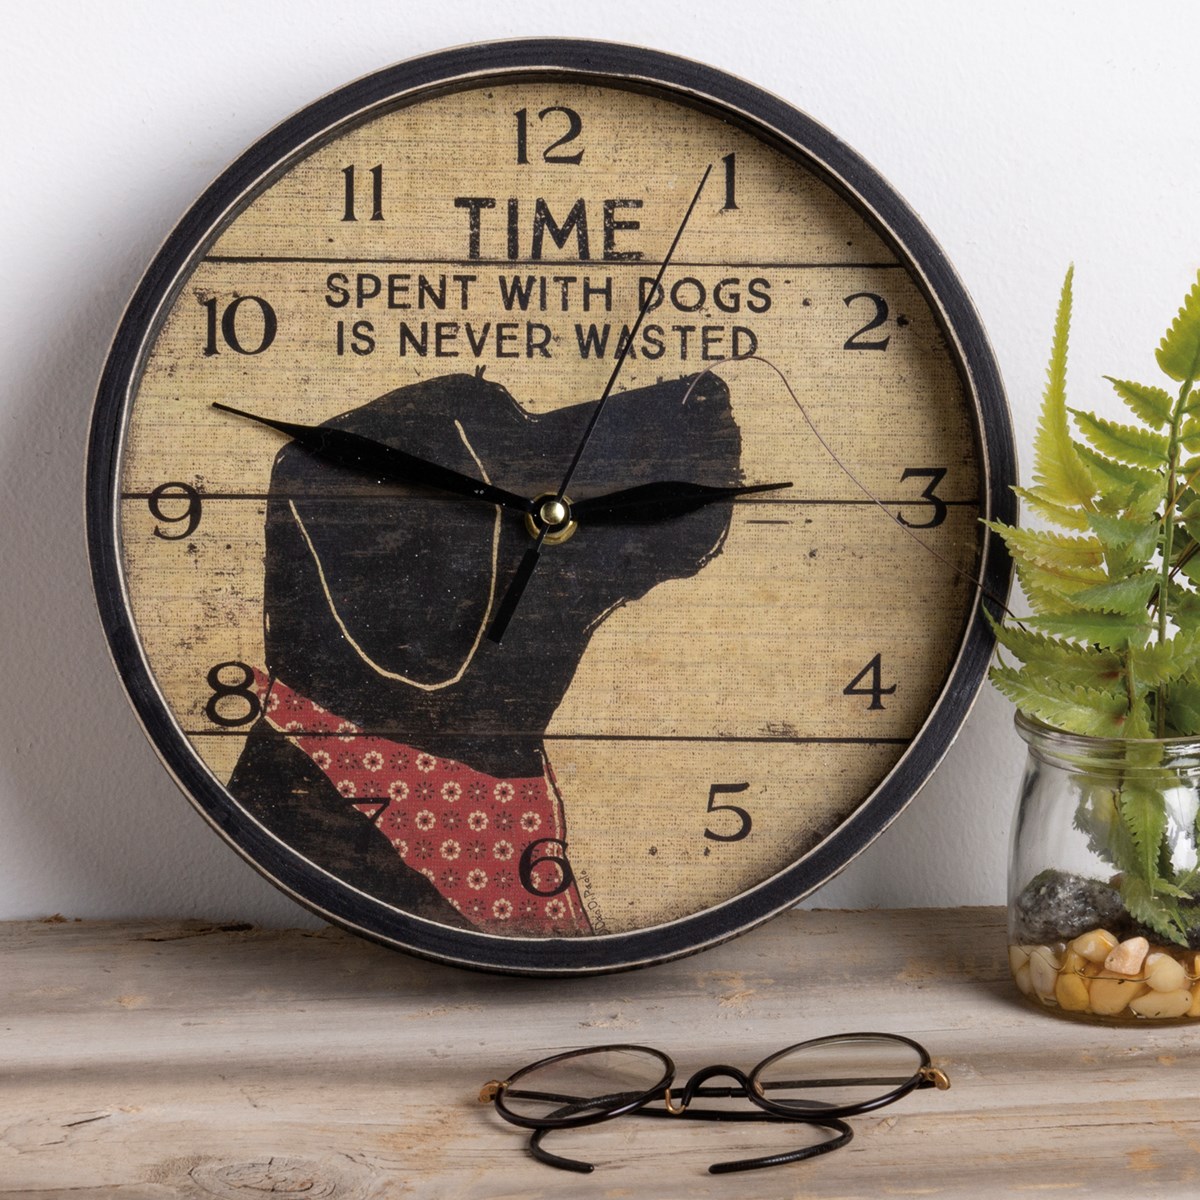 Time Spent With Dogs Is Never Wasted Clock - Wood, Paper, Glass, Metal